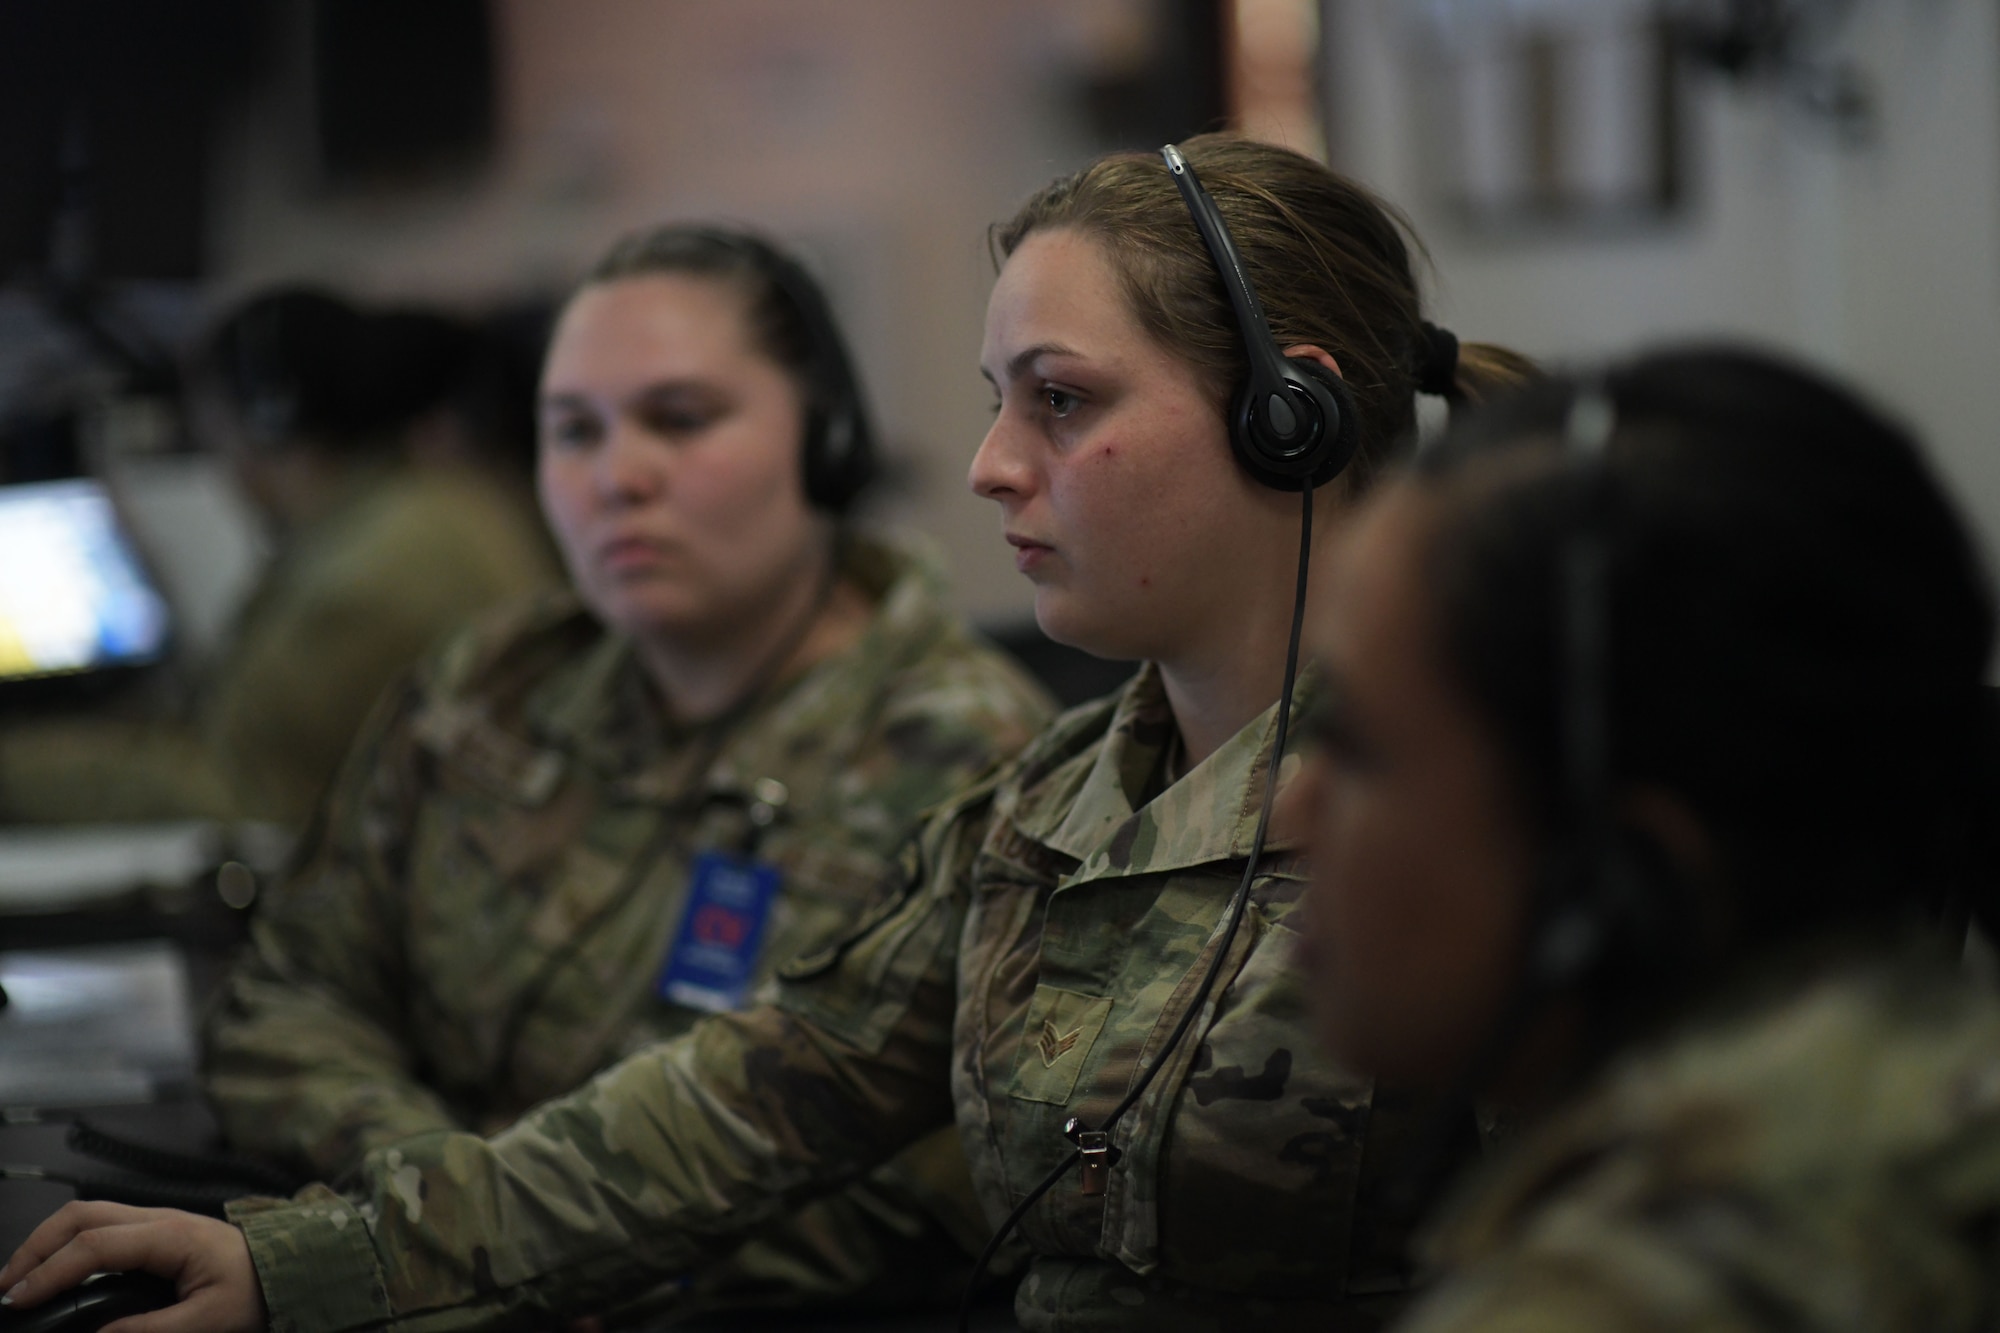 U.S. Air Force Senior Airman Rhiannon Padgett, center, 81st Air Control Squadron weapons director, explains the squadron’s role to two Airmen from the 325th Operations Support Squadron intel office at Tyndall Air Force Base, Florida, March 29, 2022.